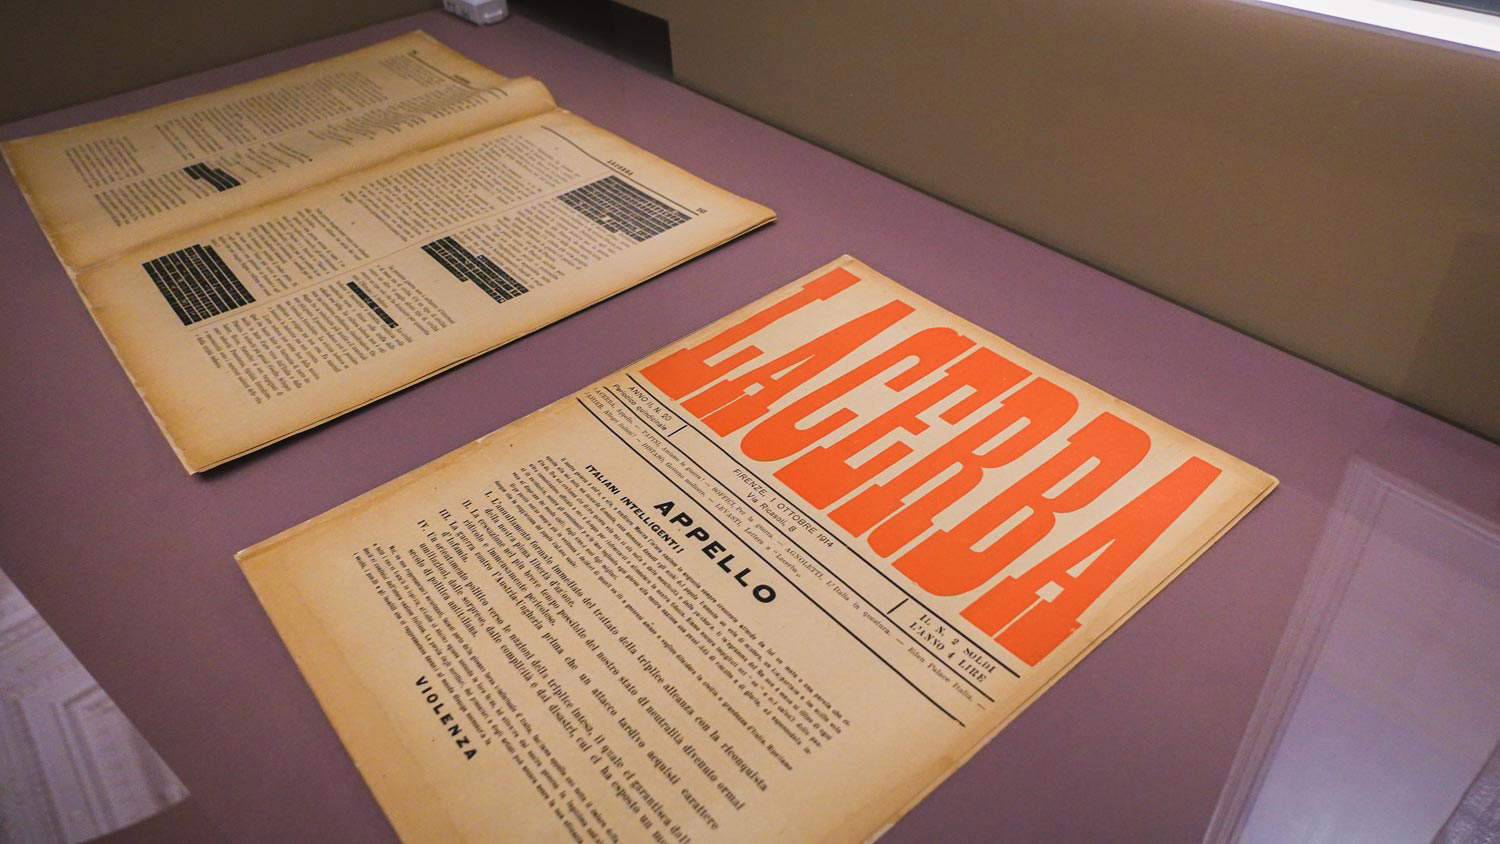 An exhibition on the cultural magazines of the early 20th century at the Uffizi